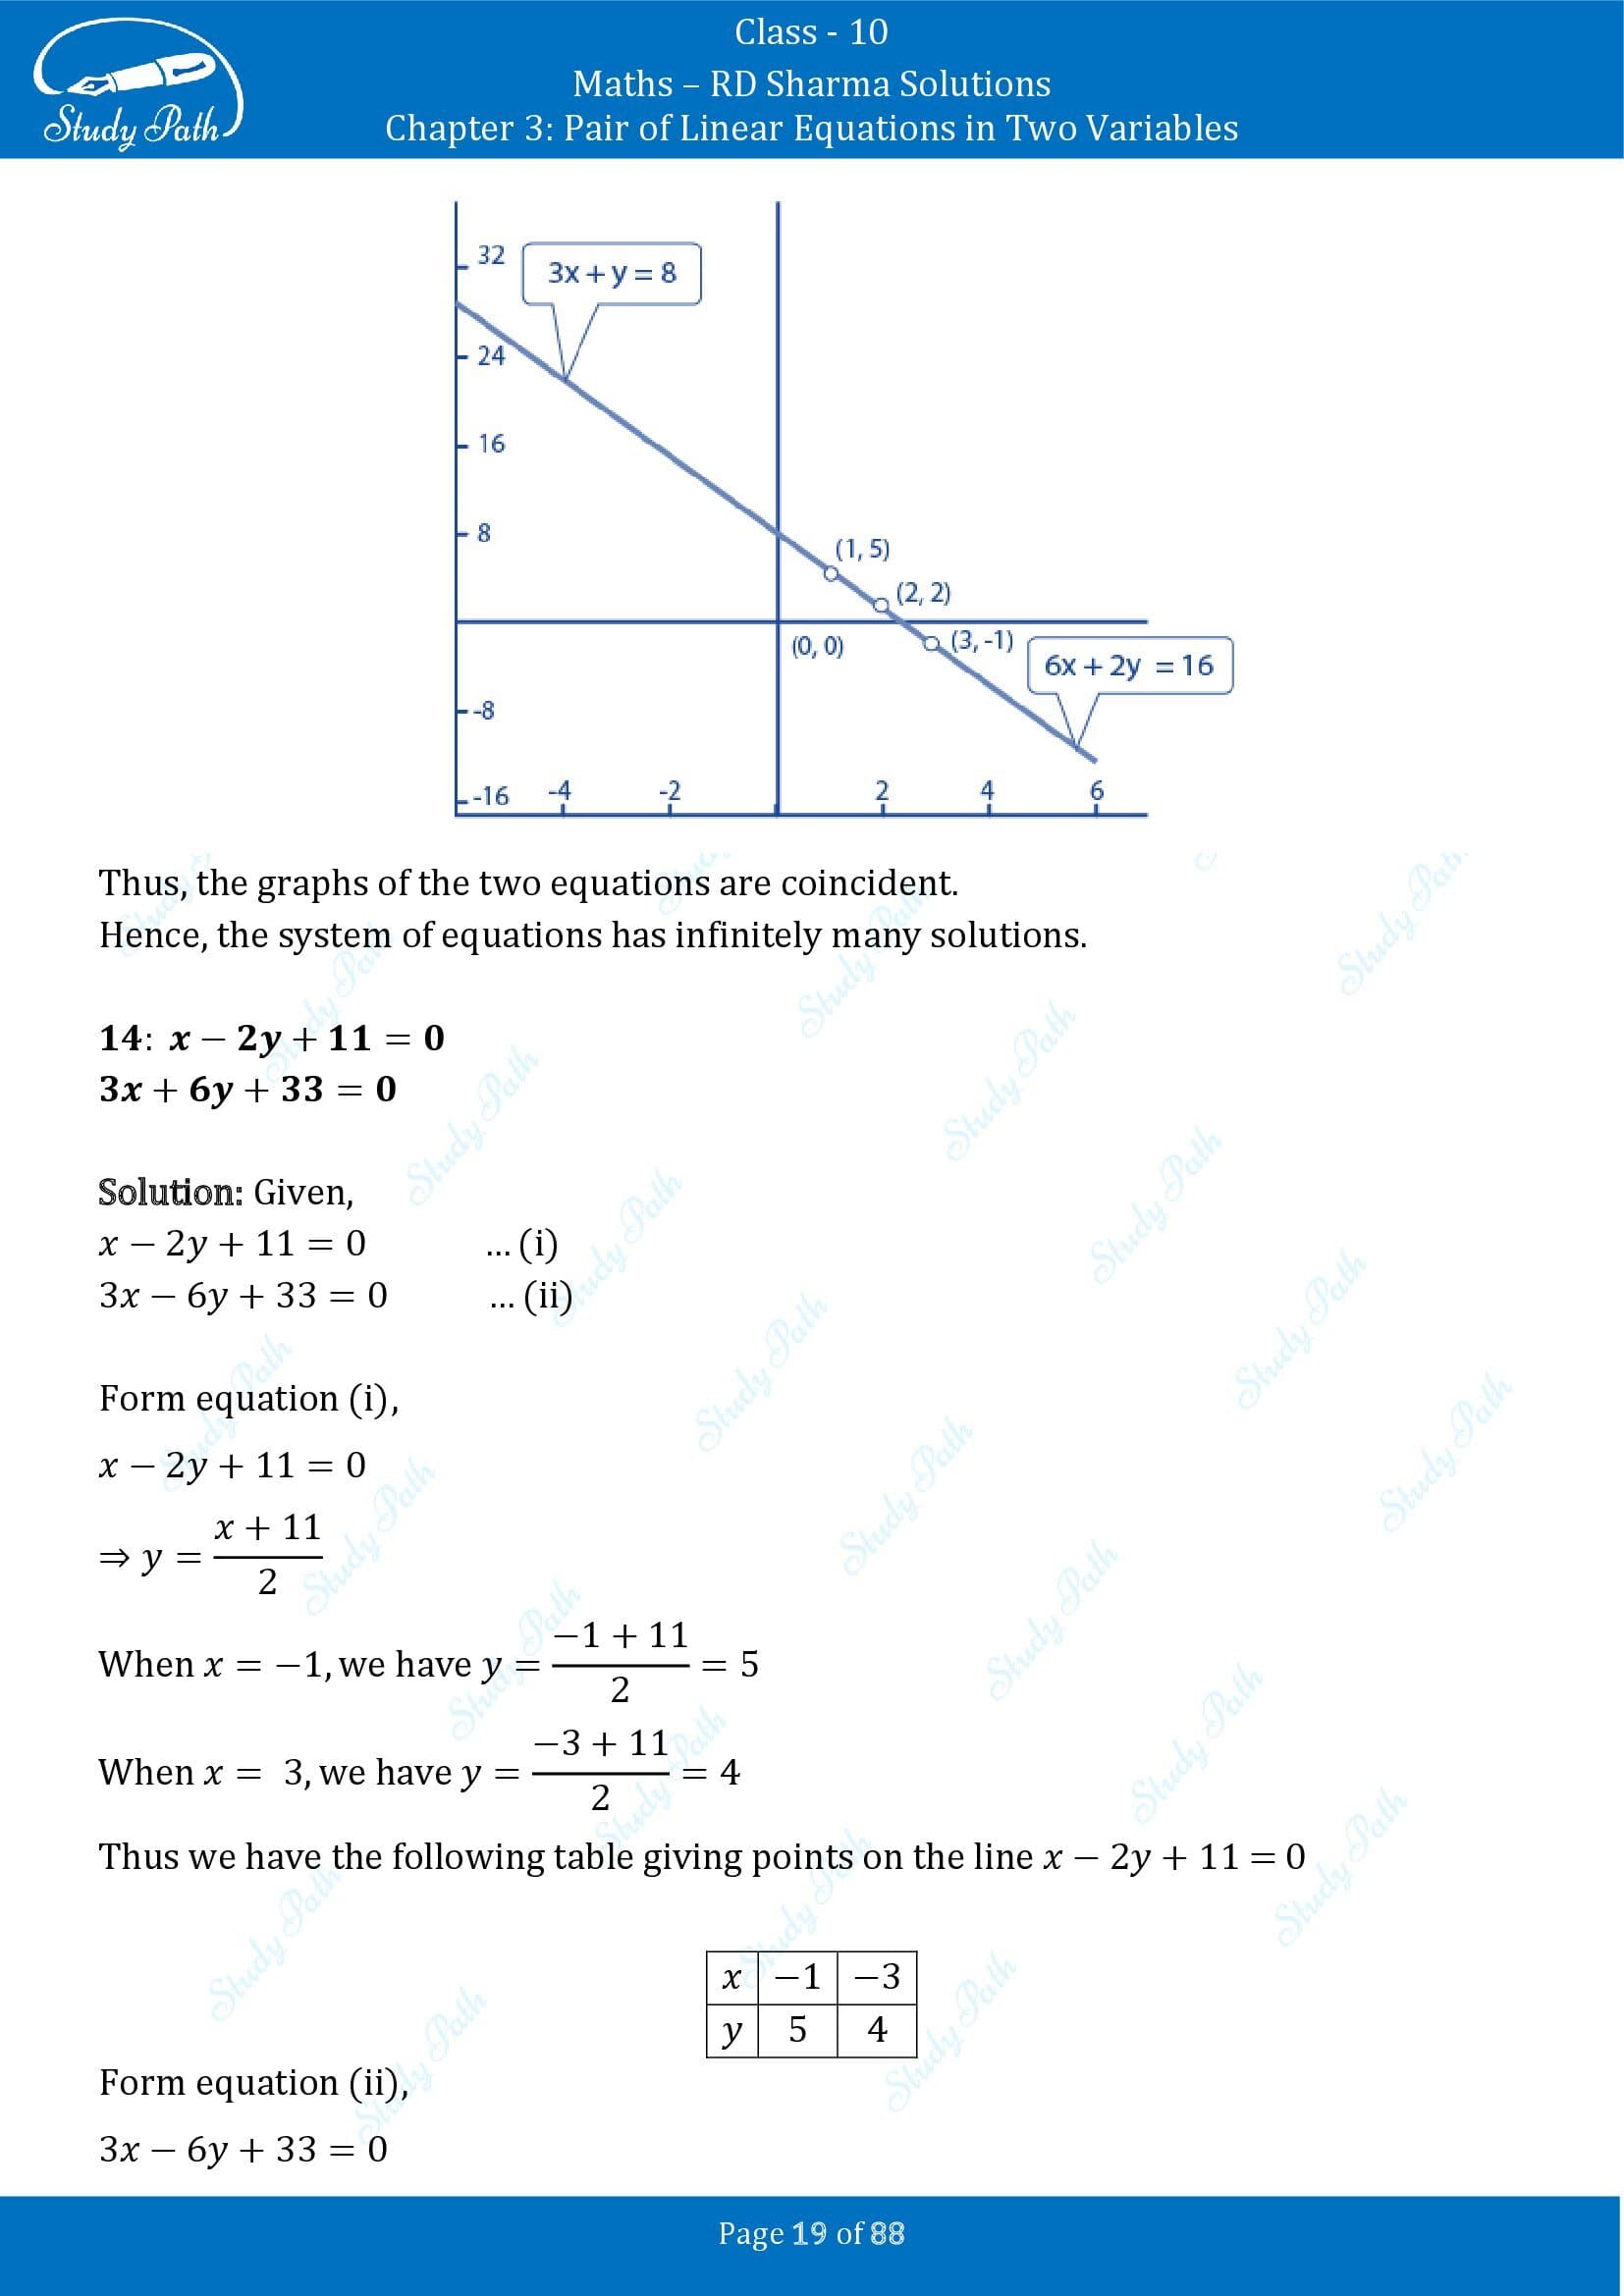 RD Sharma Solutions Class 10 Chapter 3 Pair of Linear Equations in Two Variables Exercise 3.2 00019